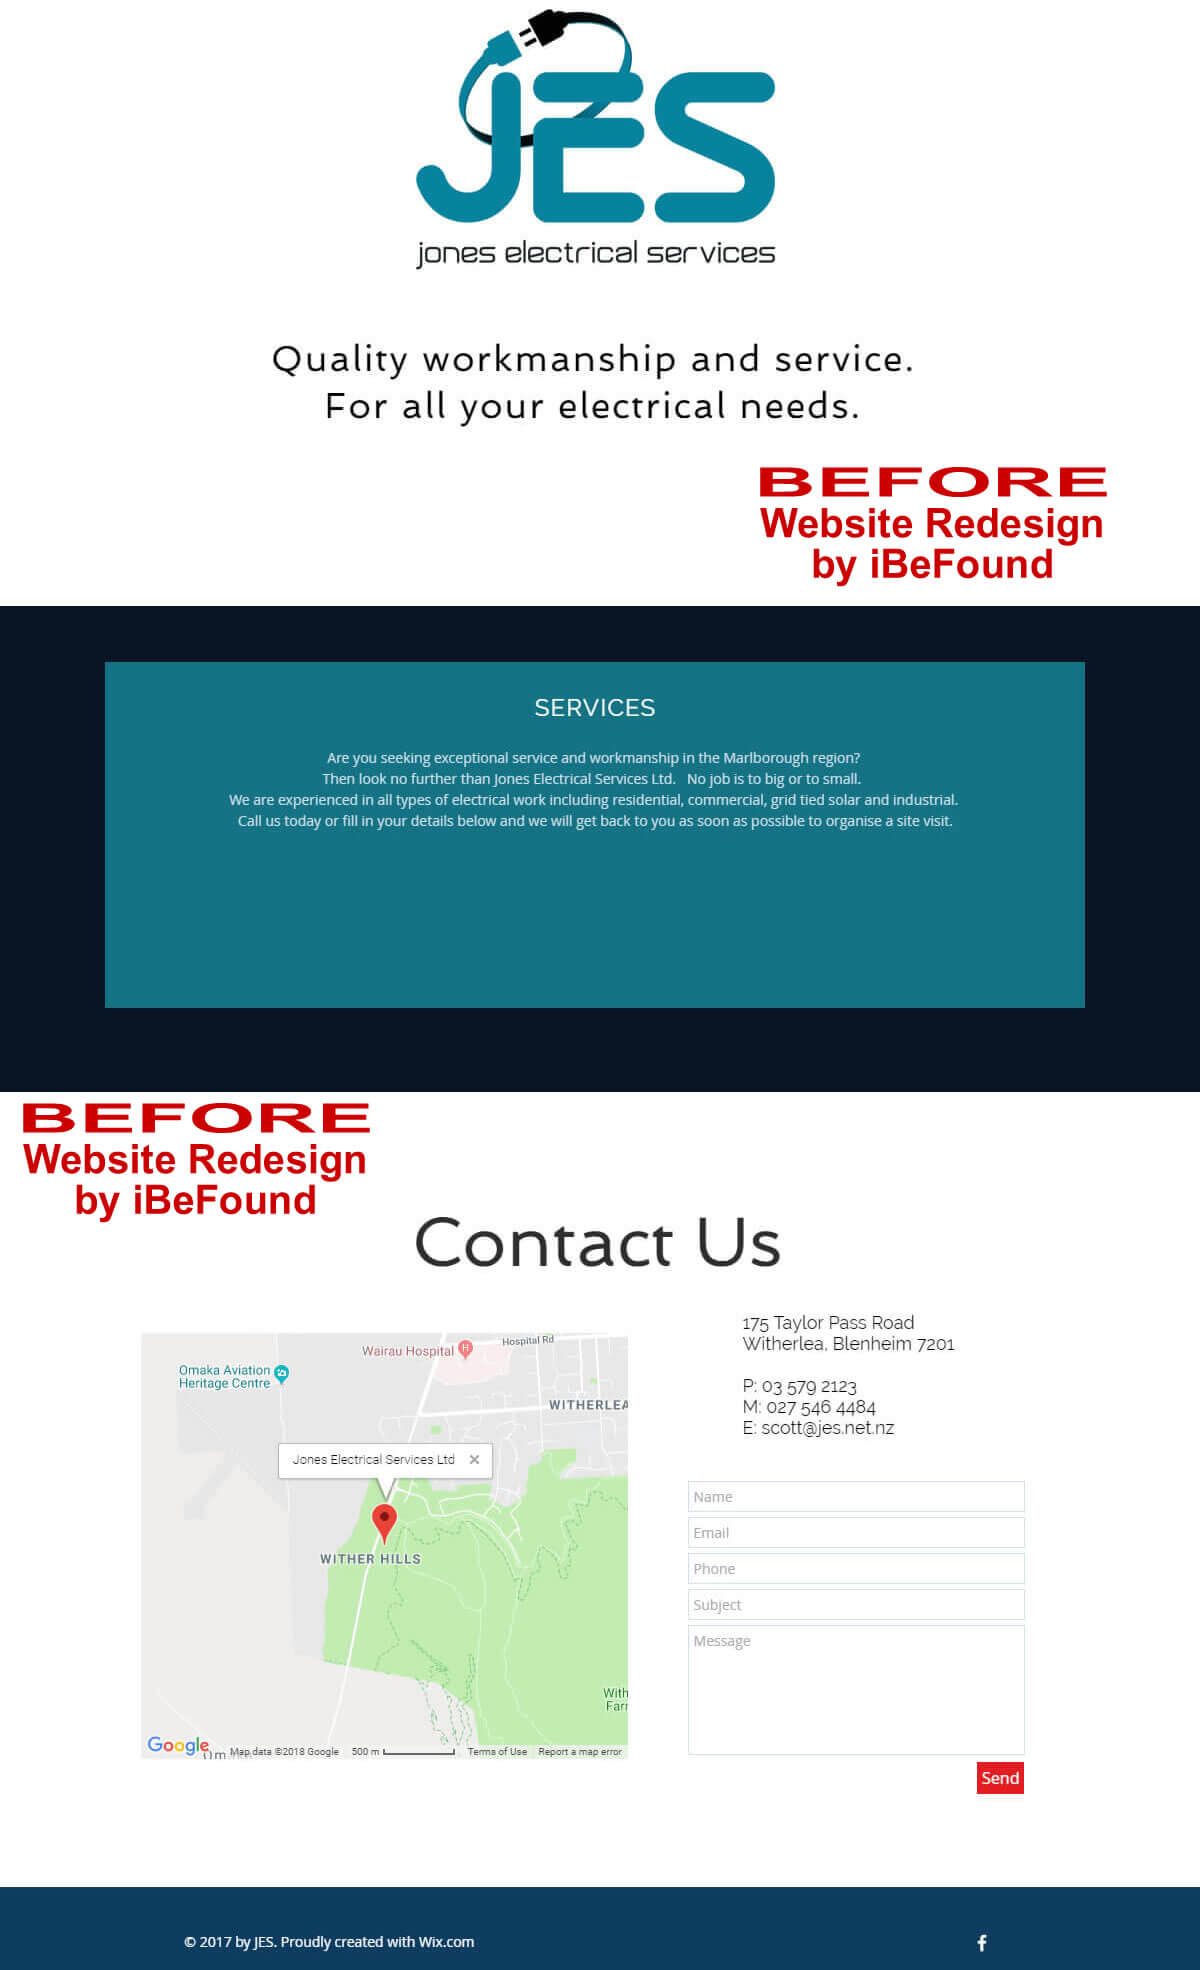 Homepage Of Jones Electrical Services Ltd Before Website Redesign By IBeFound